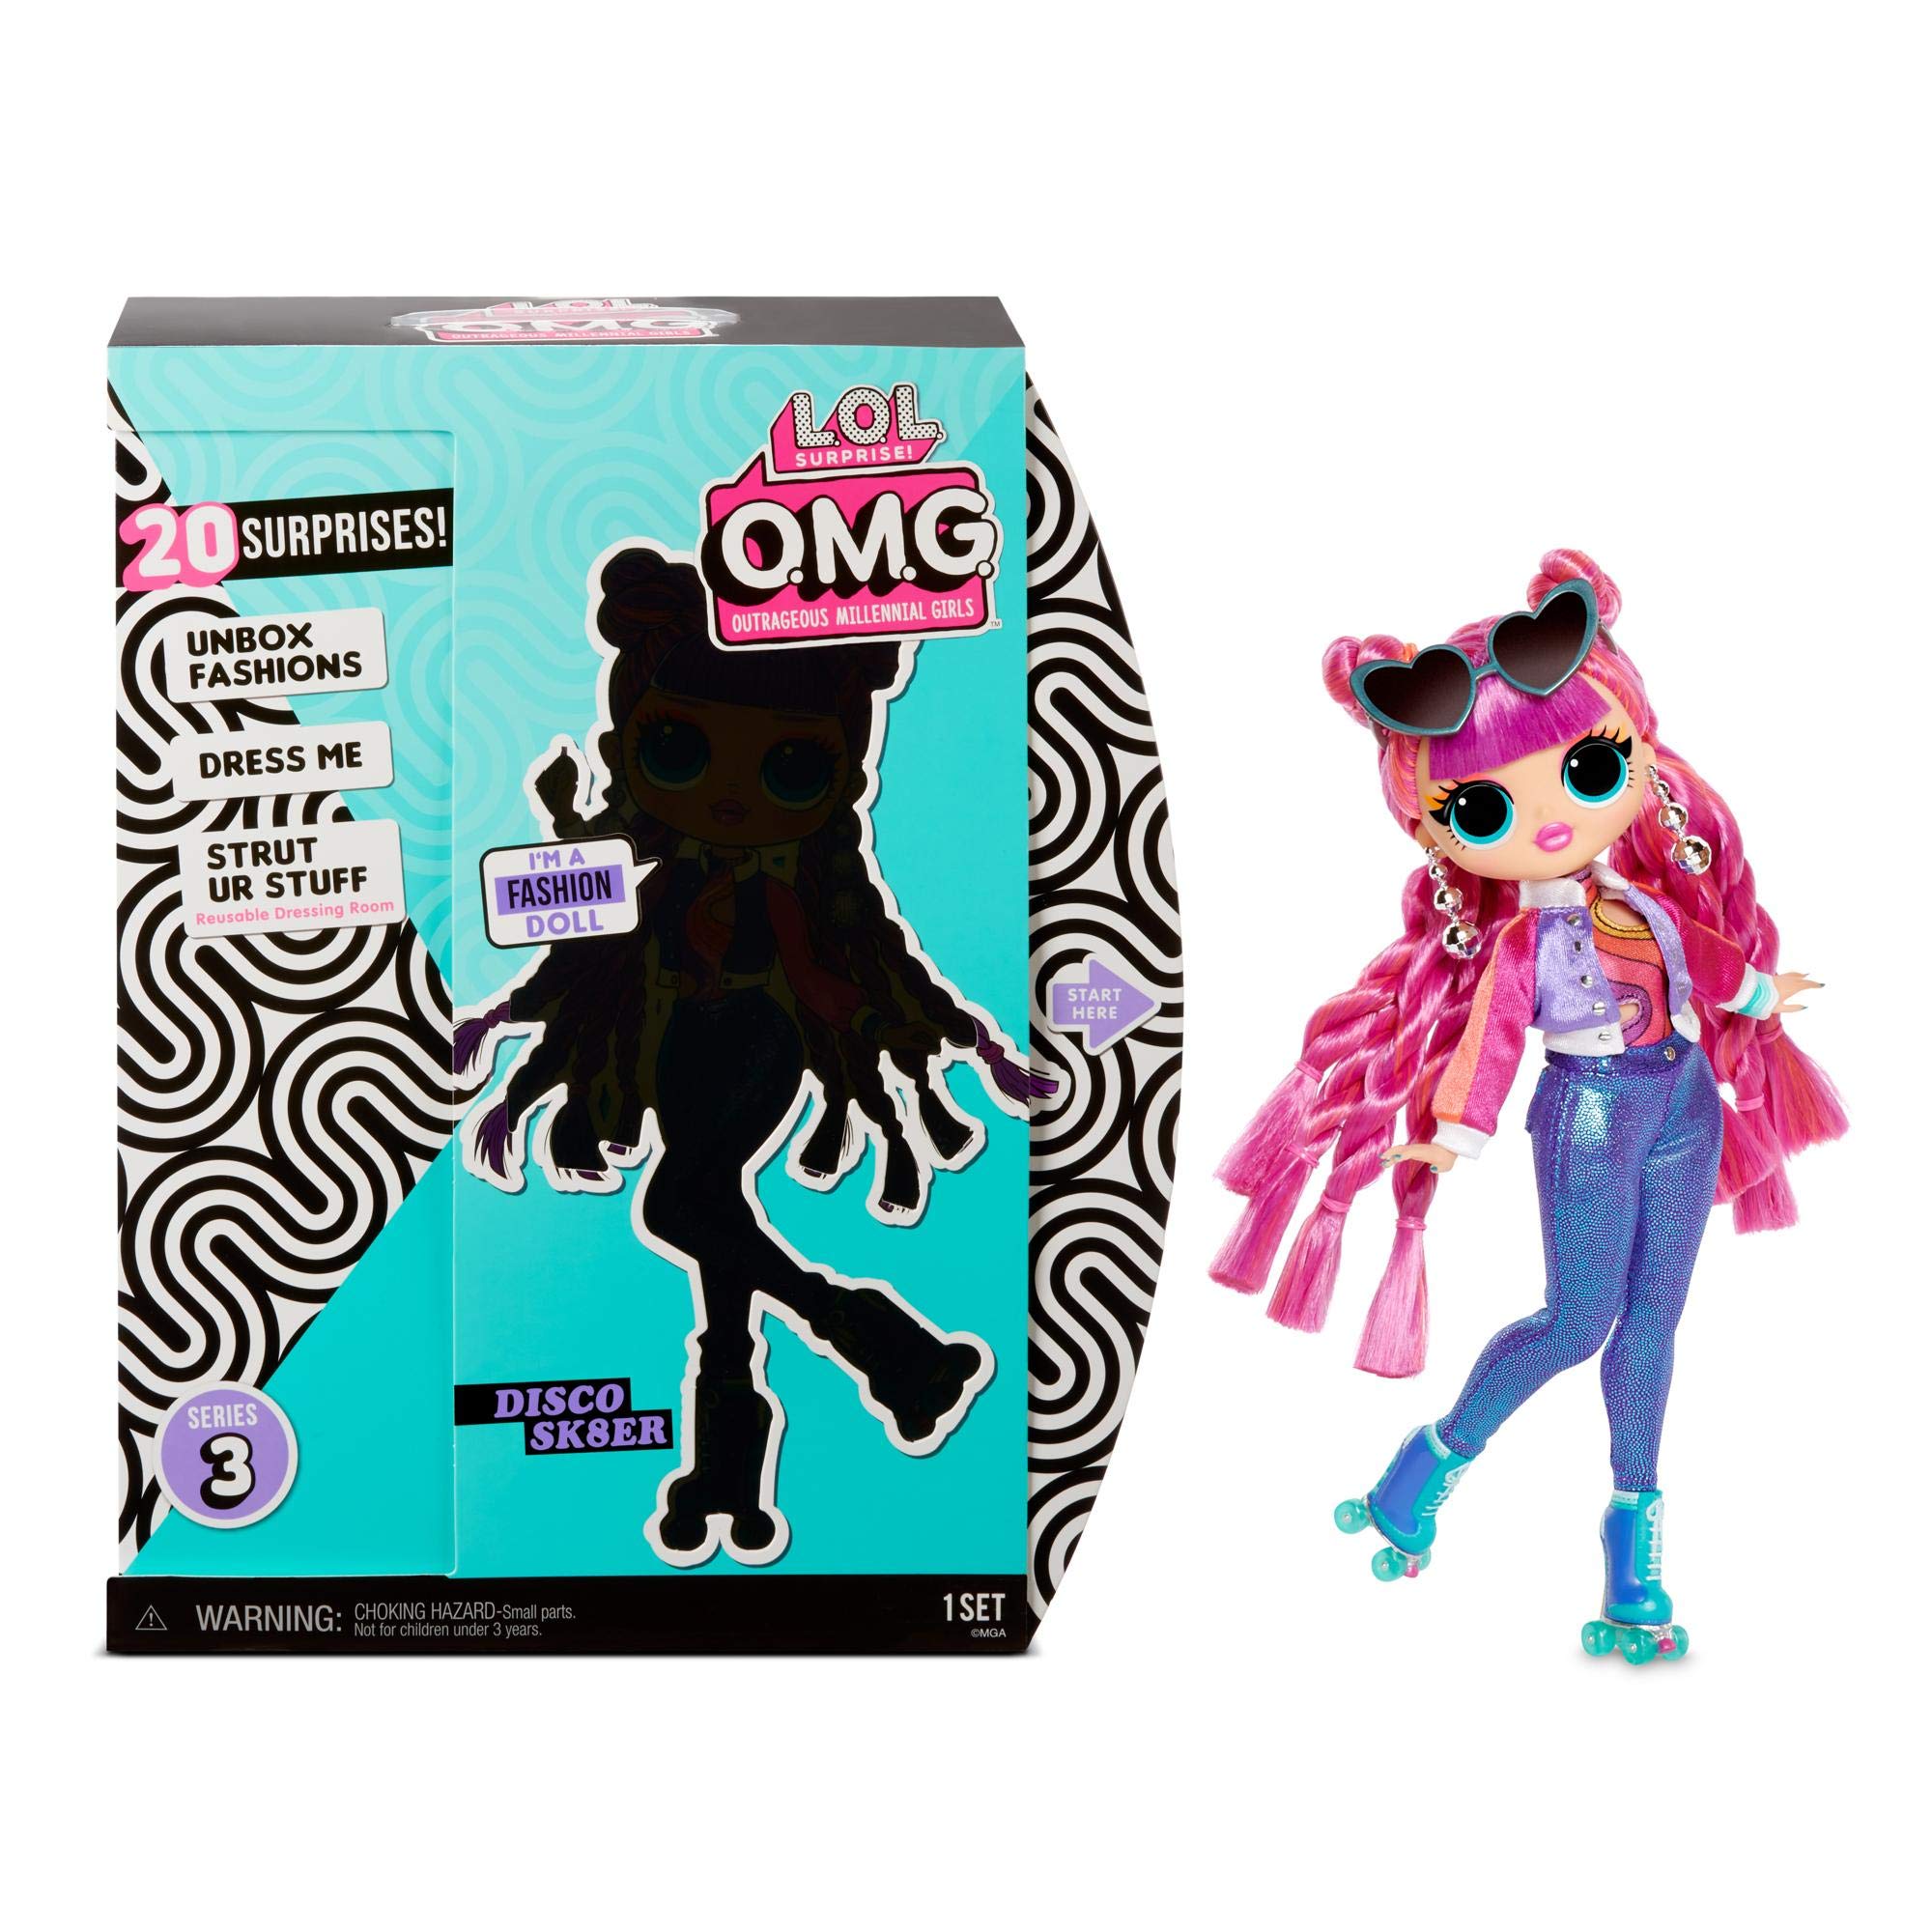 L.O.L. Surprise O.M.G. Series 3 Roller Chick Fashion Doll with 20 Surprises